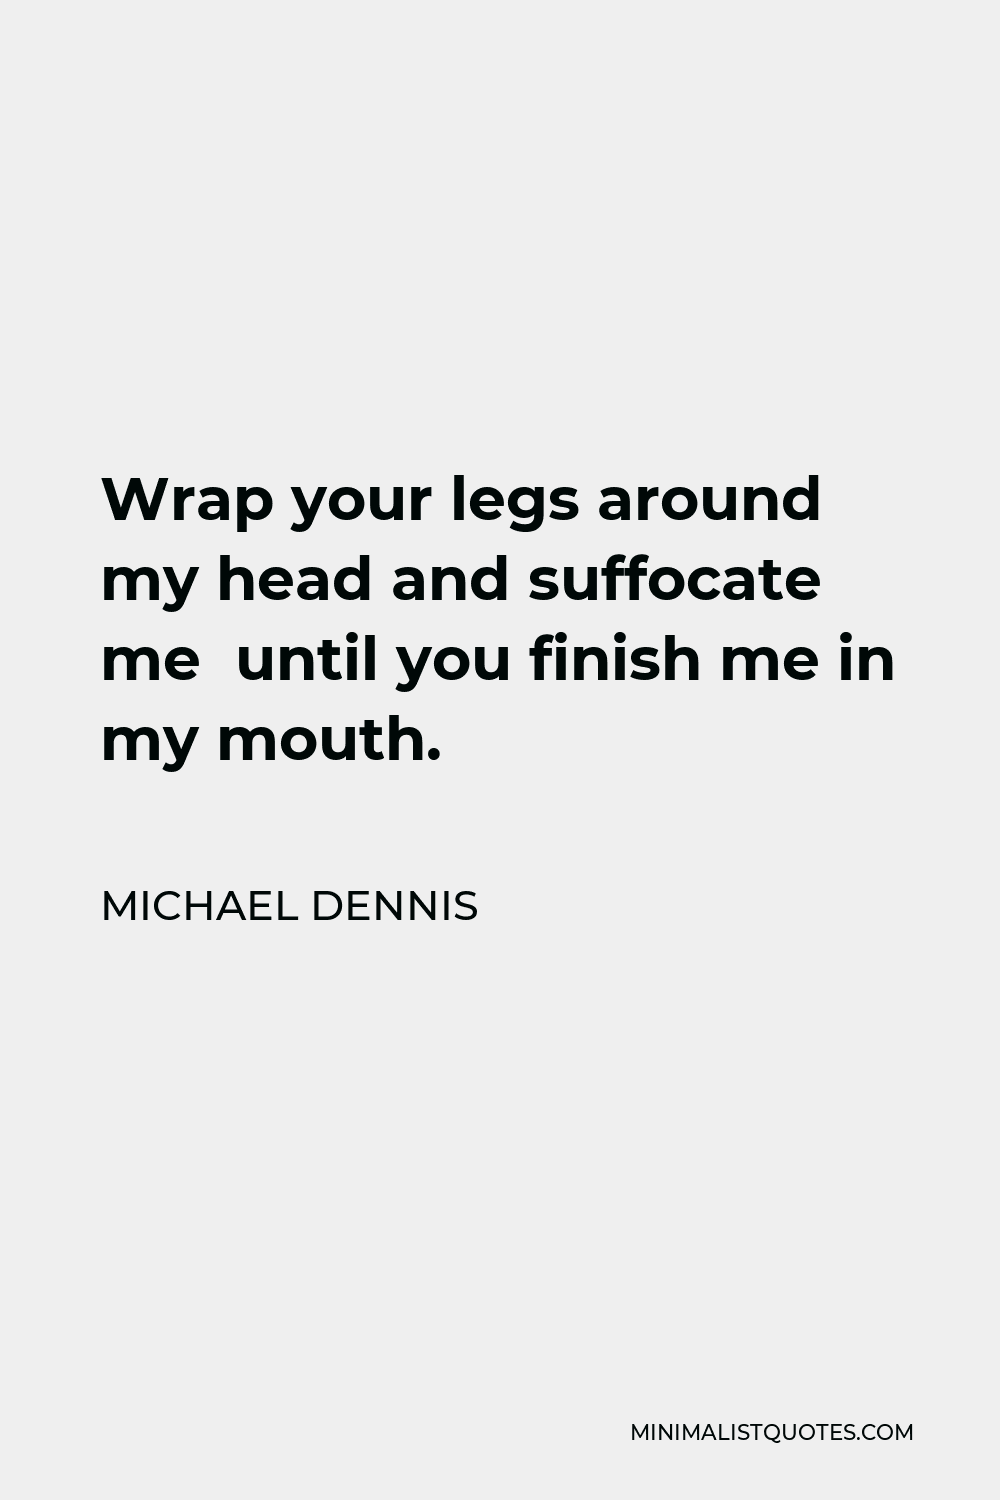 Michael Dennis Quote - Wrap your legs around my head and suffocate me until you finish me in my mouth.